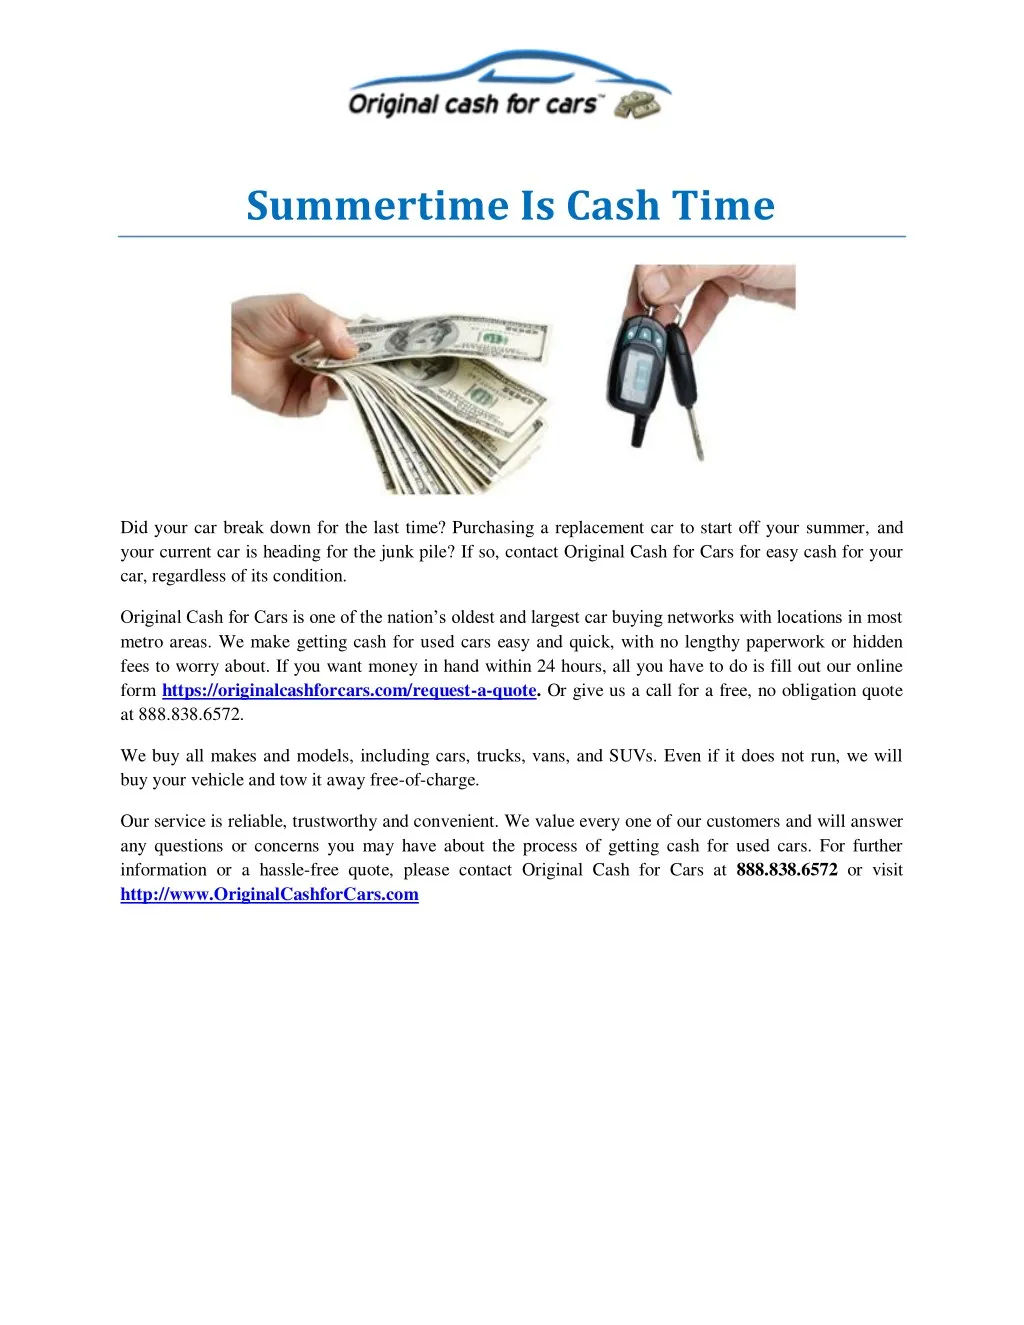 summertime is cash time